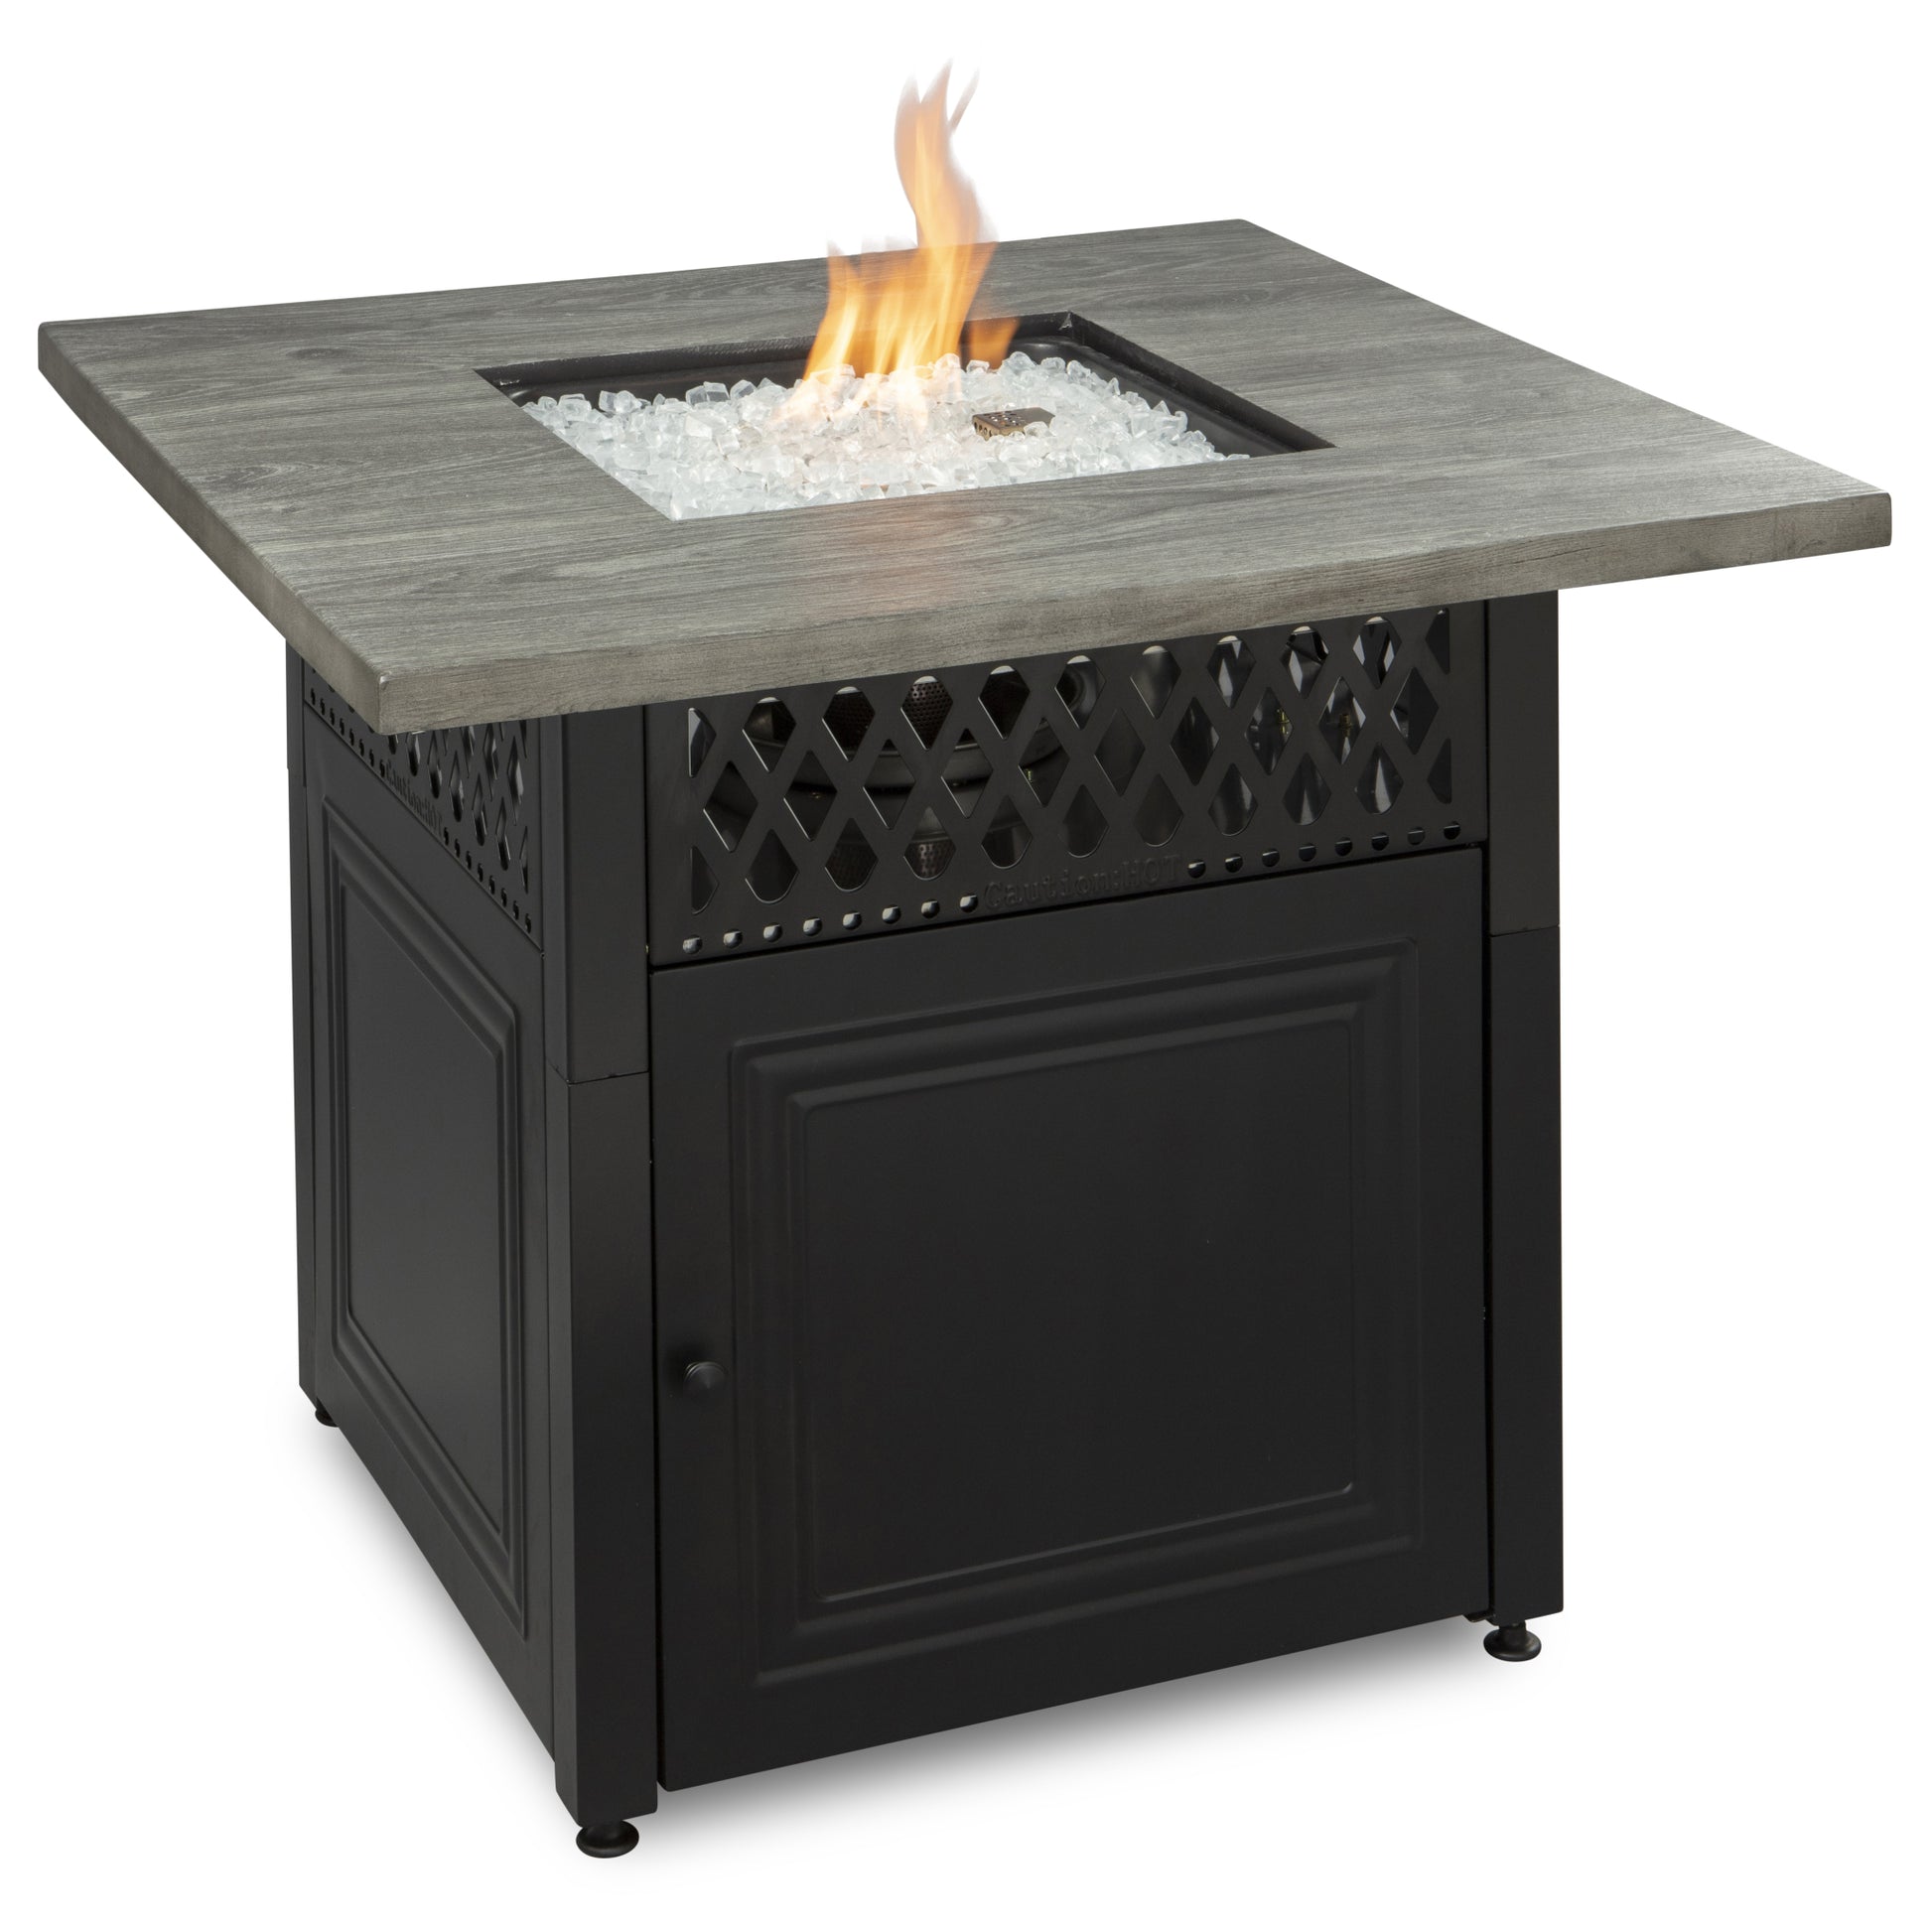 Endless Summer The Dakota, Dual Heat LP Gas Outdoor Fire Pit/Patio Heater with Wood Look Resin Mantel GAD19101ES freeshipping - Luxury Tech Inc.